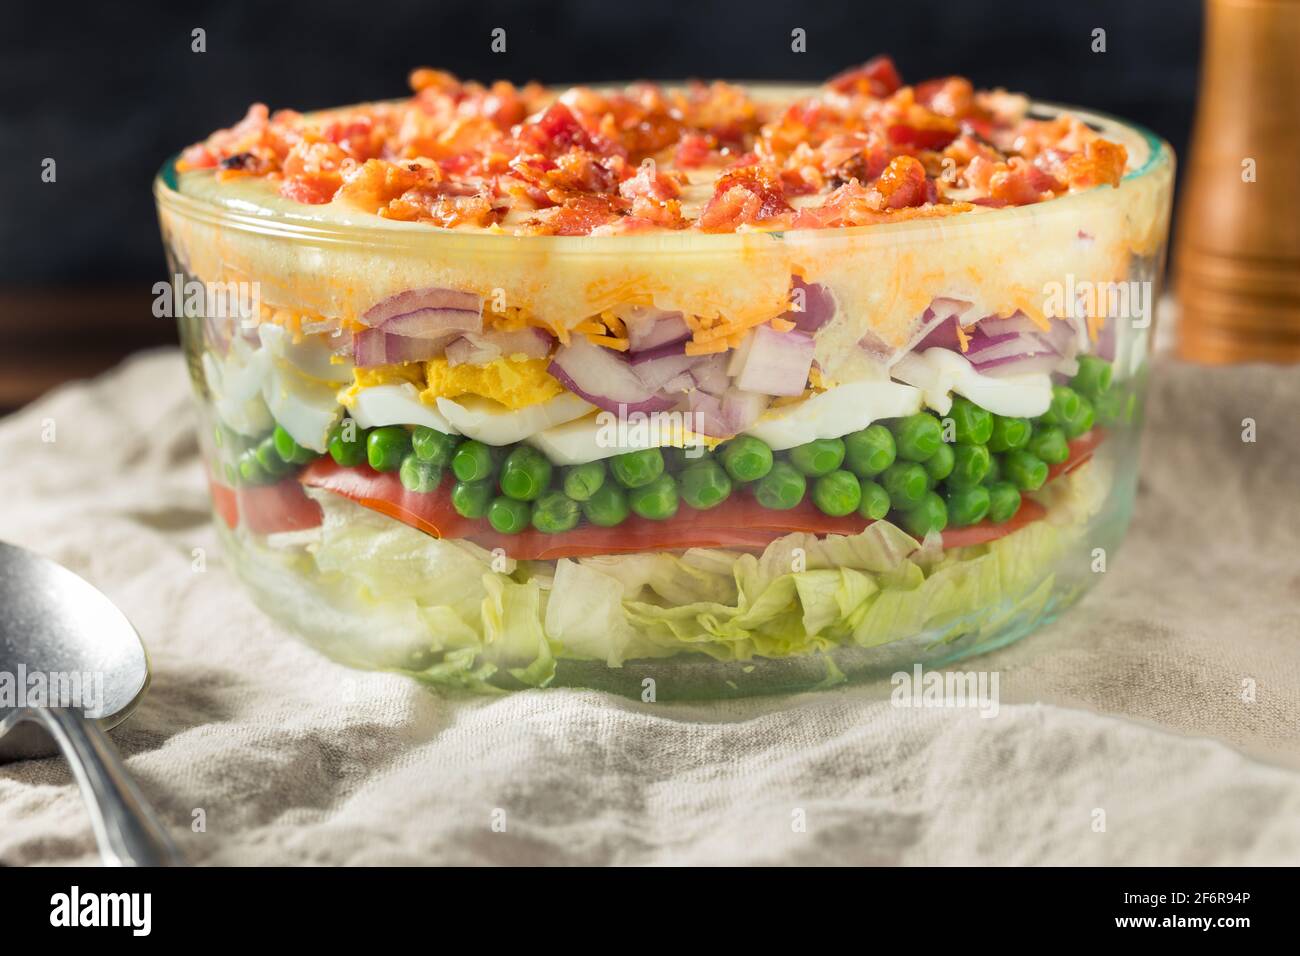 Homemade Seven Layer Salad with Eggs Bacon Peas and Lettuce Stock Photo